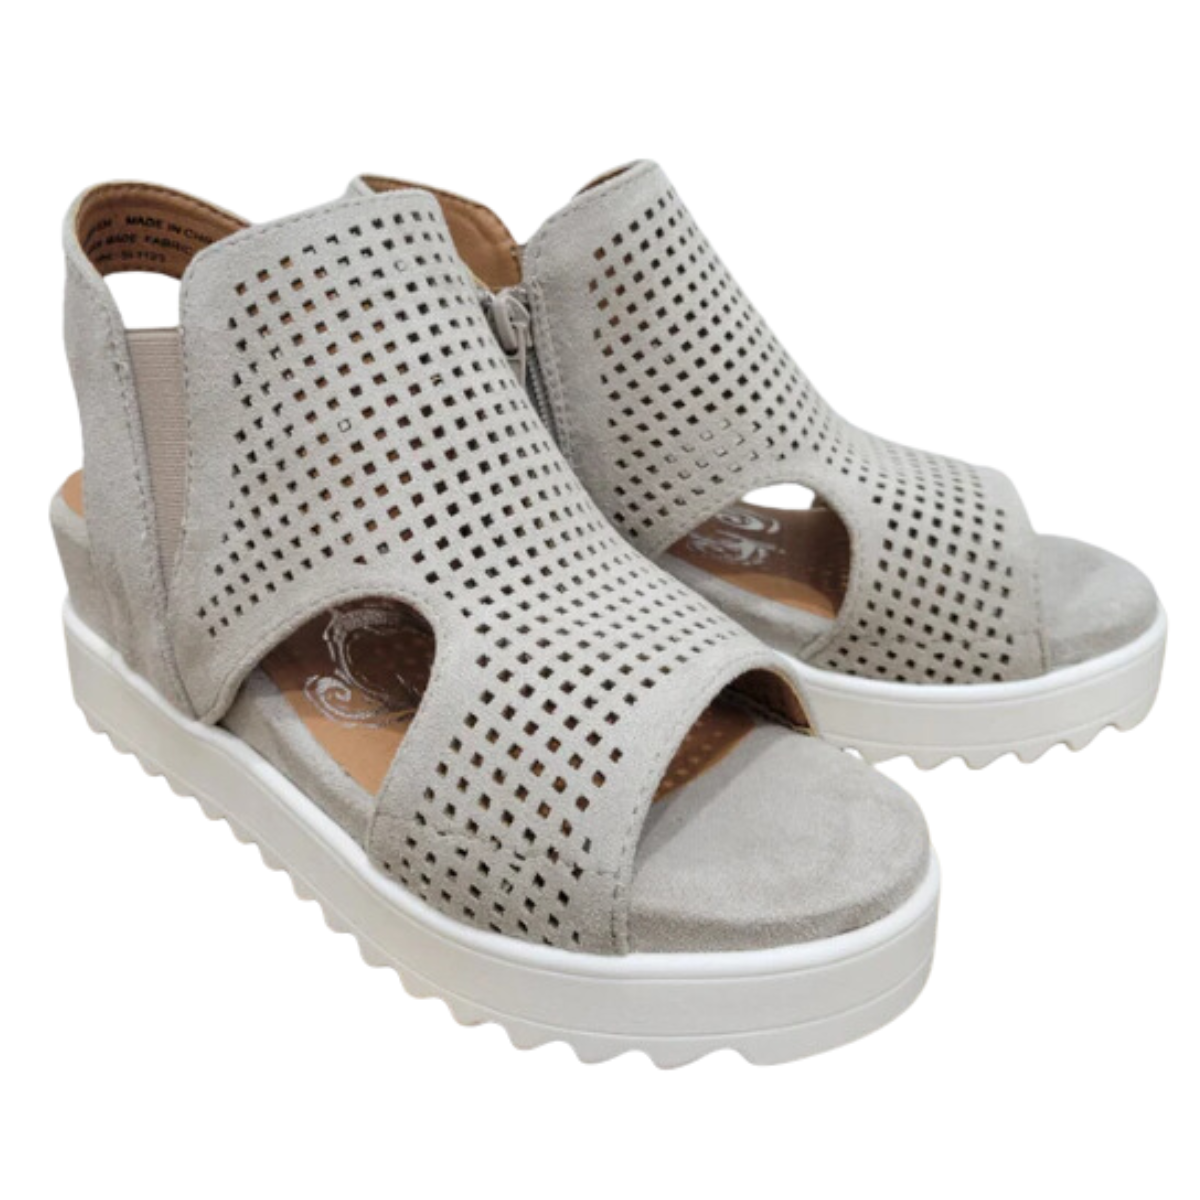 A trendy pair of Amy Wedge Sandals in Light Grey made from micro suede by VERY G.